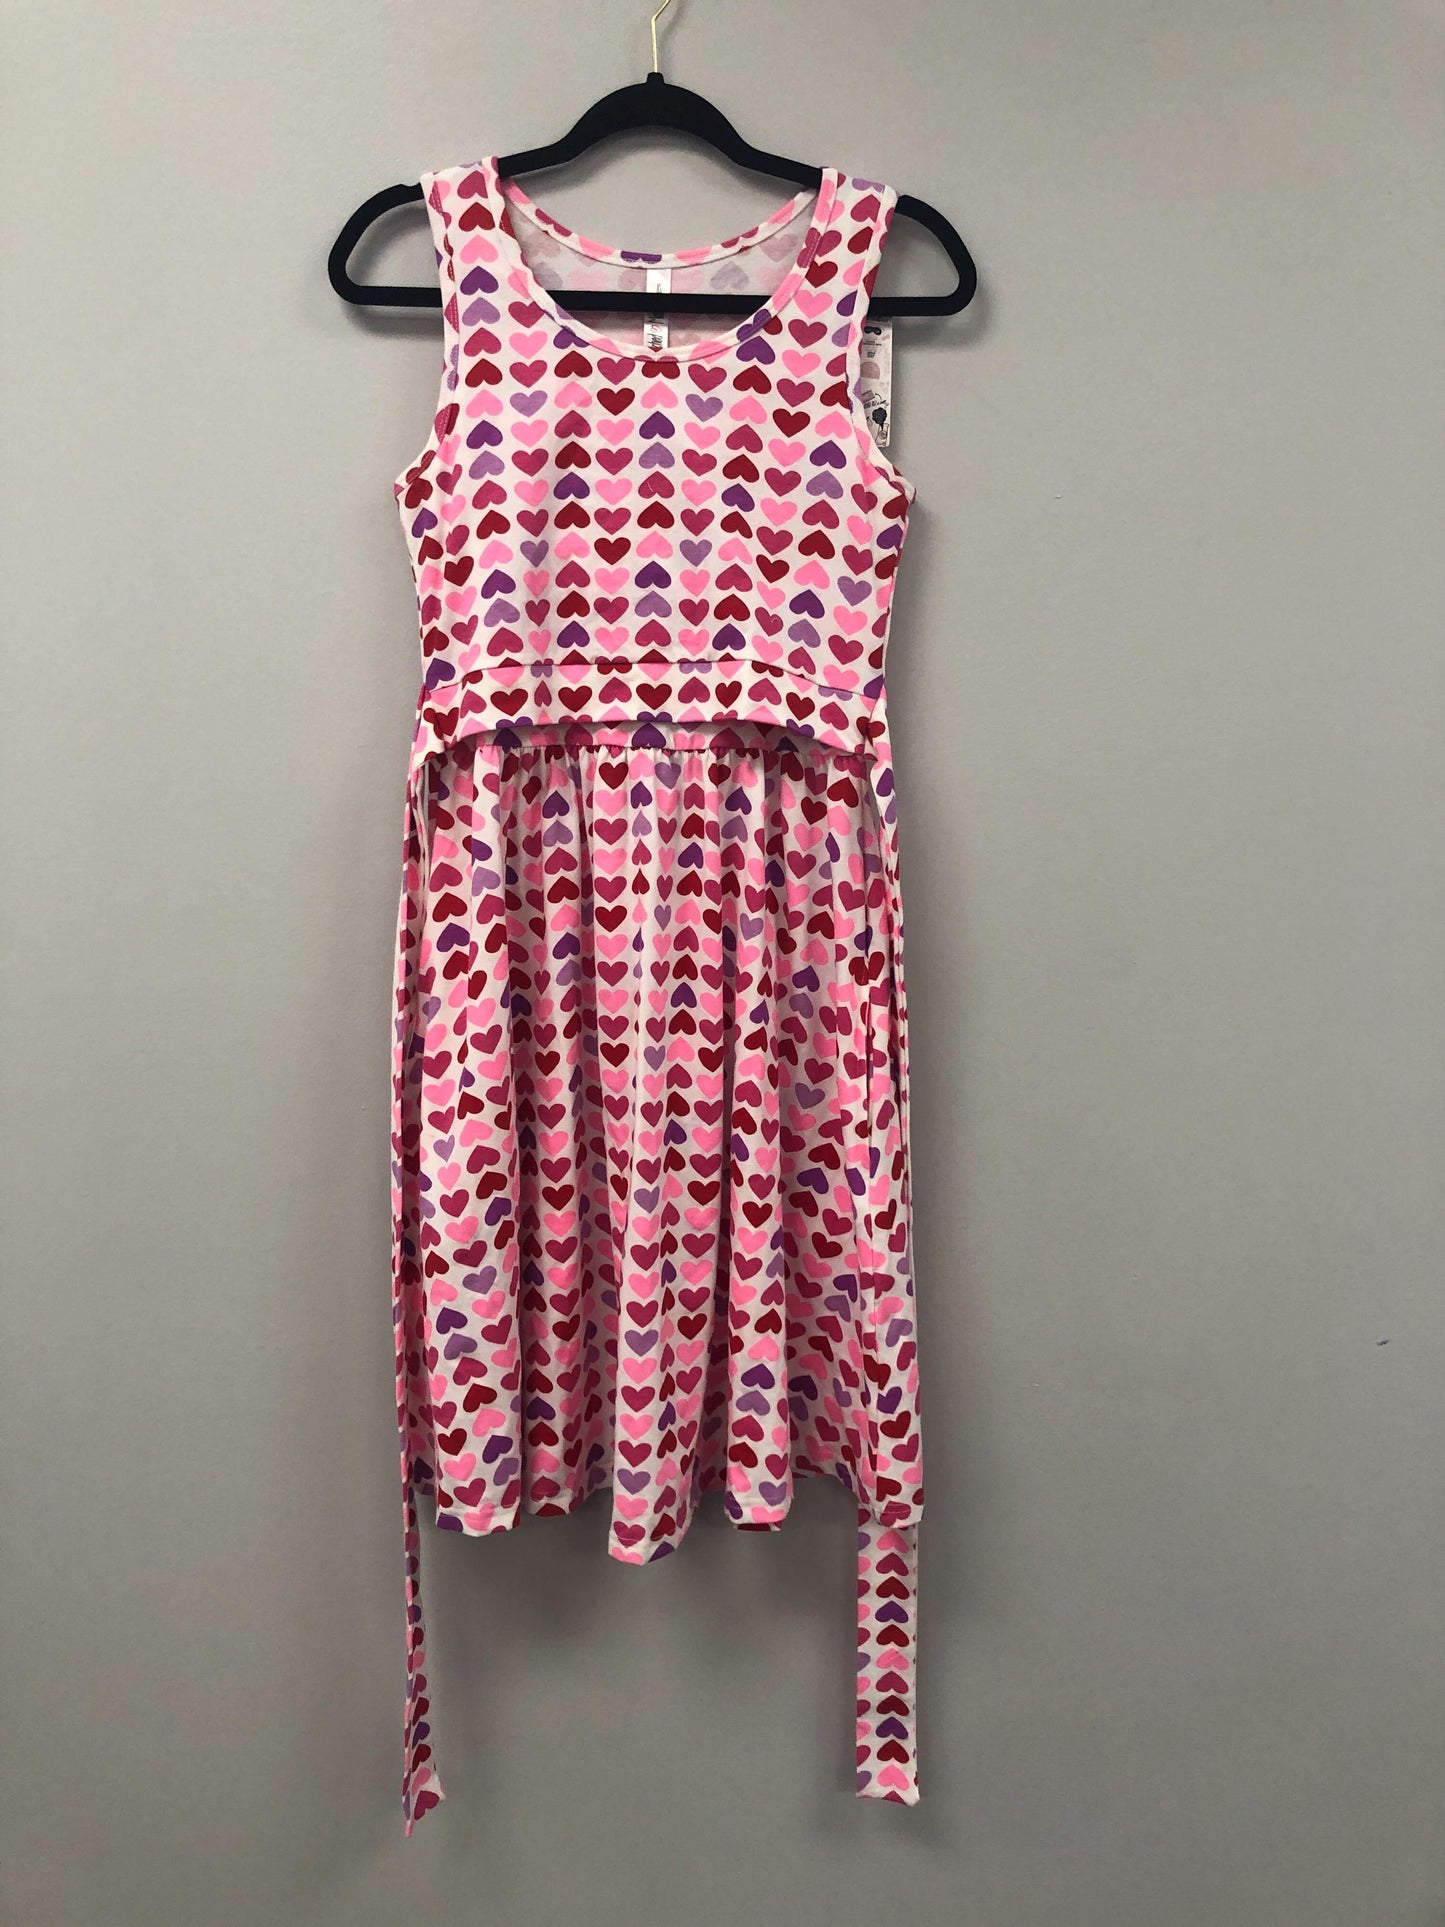 Outlet 5637 - Latched Mama Sunkissed Nursing Sundress - Hearts - Extra Small